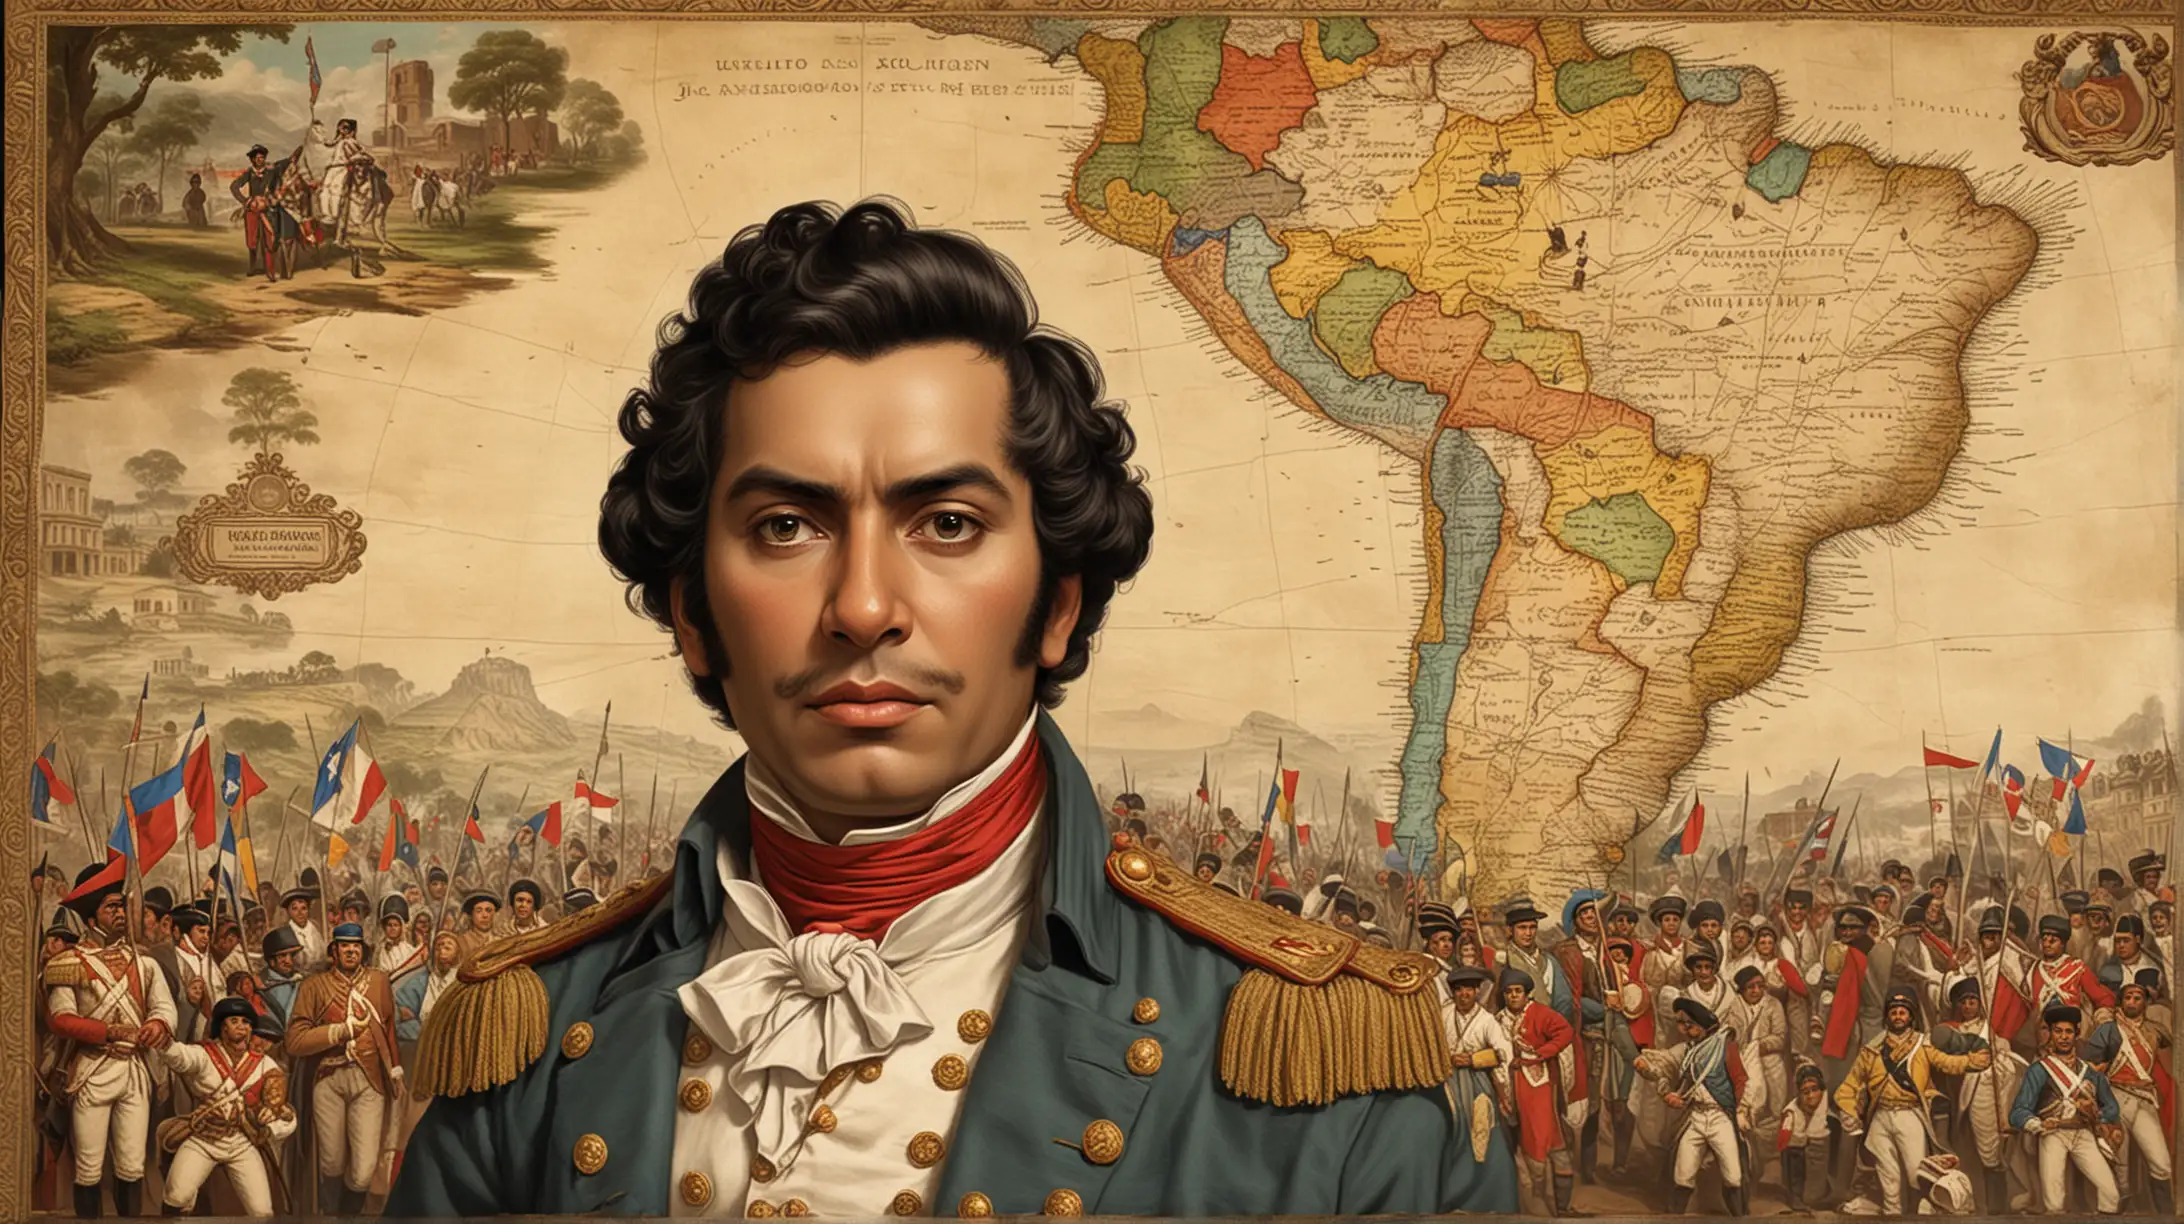 Visualize Bolívar's grand vision coming to fruition with the creation of Gran Colombia:

Image Description: Generate an awe-inspiring scene of Simón Bolívar standing before a map of South America, surrounded by delegates from diverse regions, as he proclaims the birth of Gran Colombia. Bolívar's face exudes determination and hope as he articulates his vision for a united and prosperous nation that will bring freedom and prosperity to its people.
